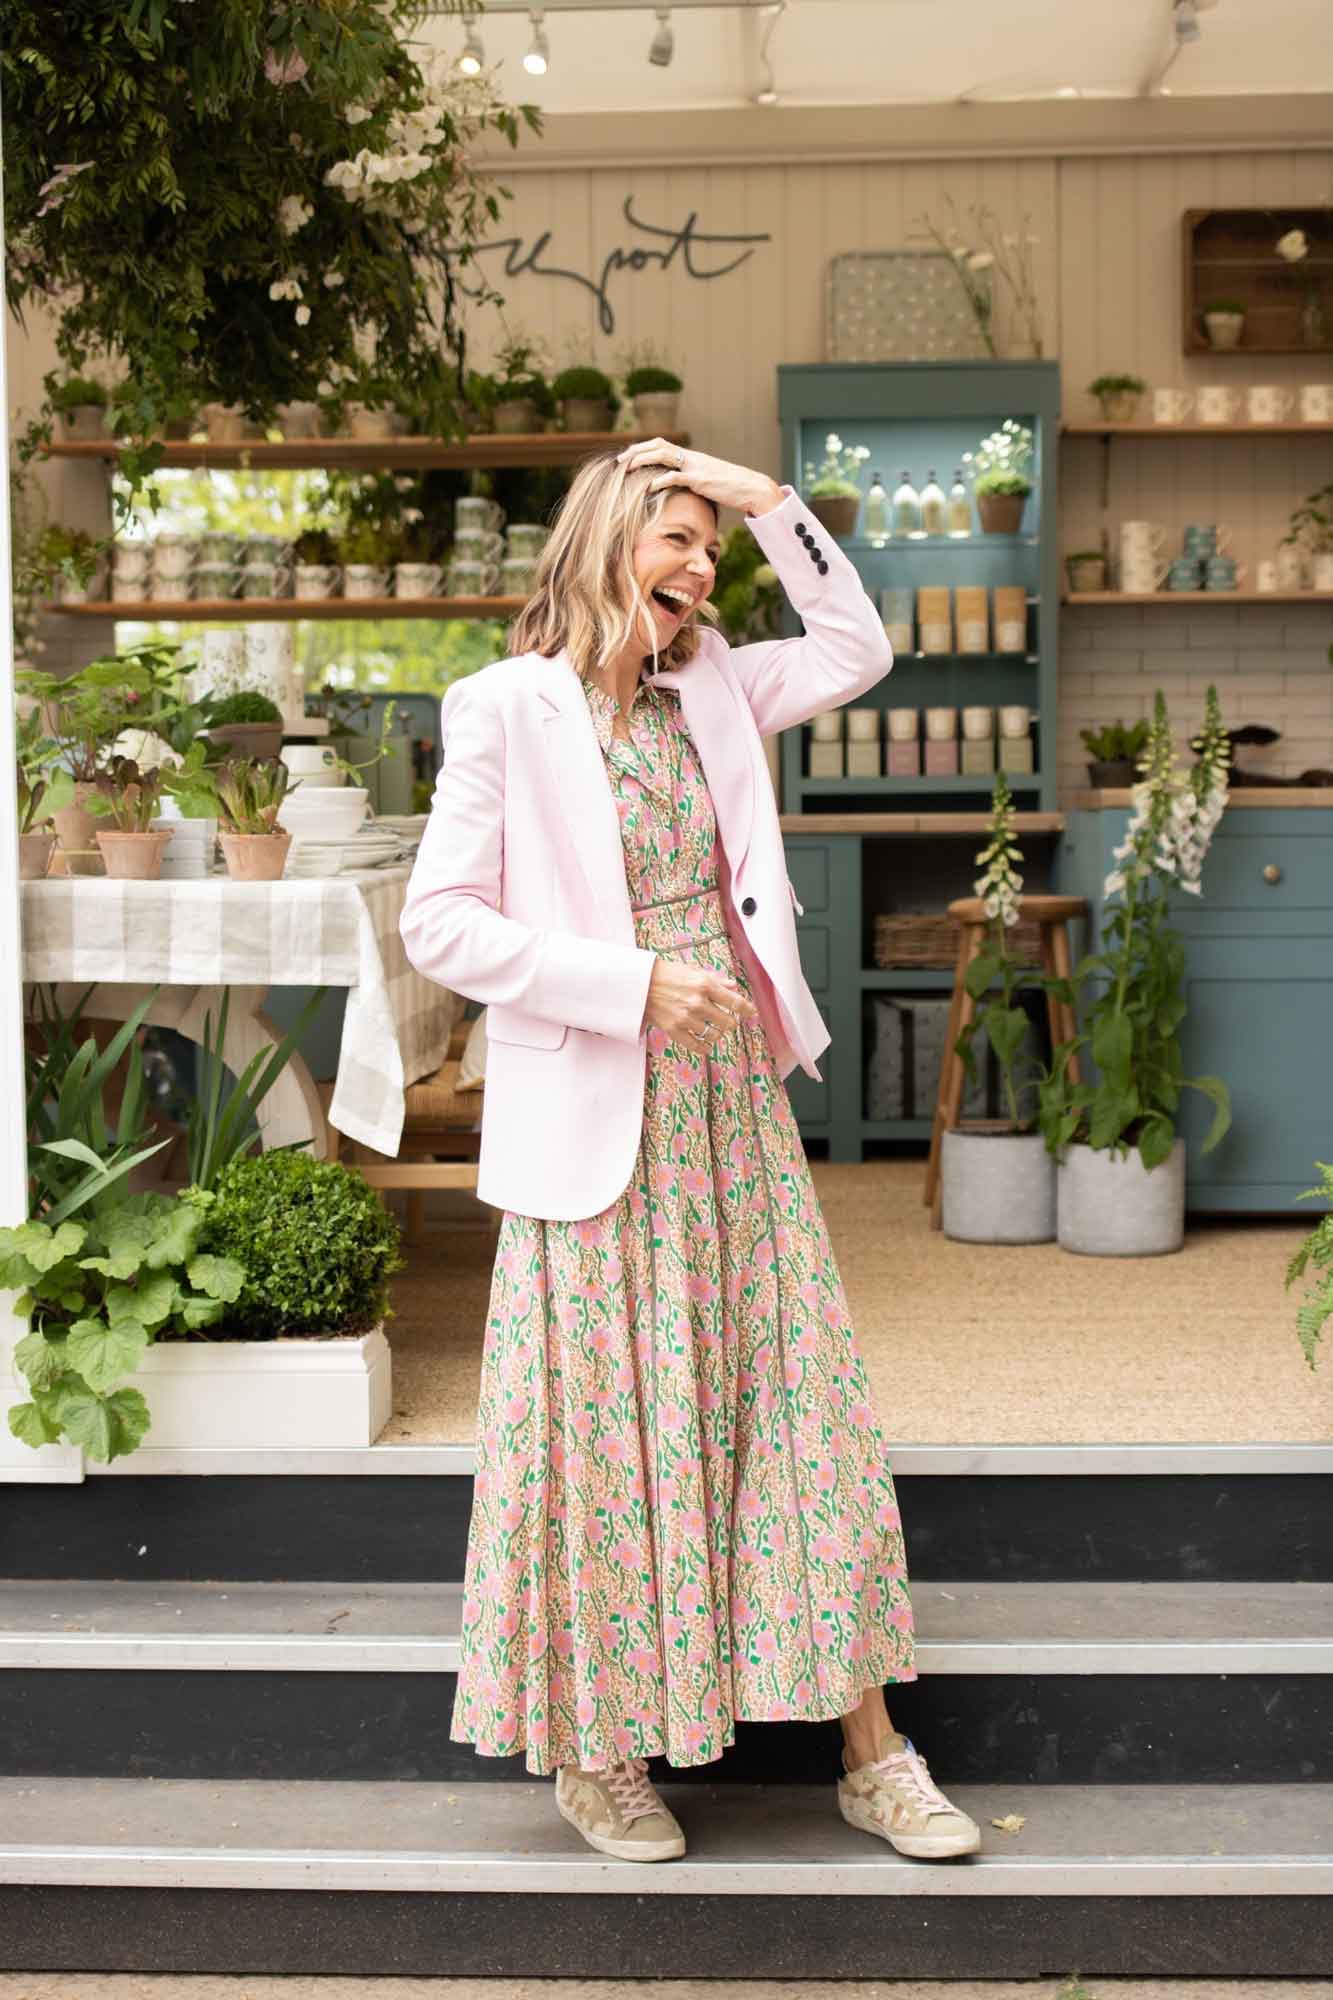 Sophie Allport Wins First Five-Star Stand Award at Chelsea Flower Show 2023